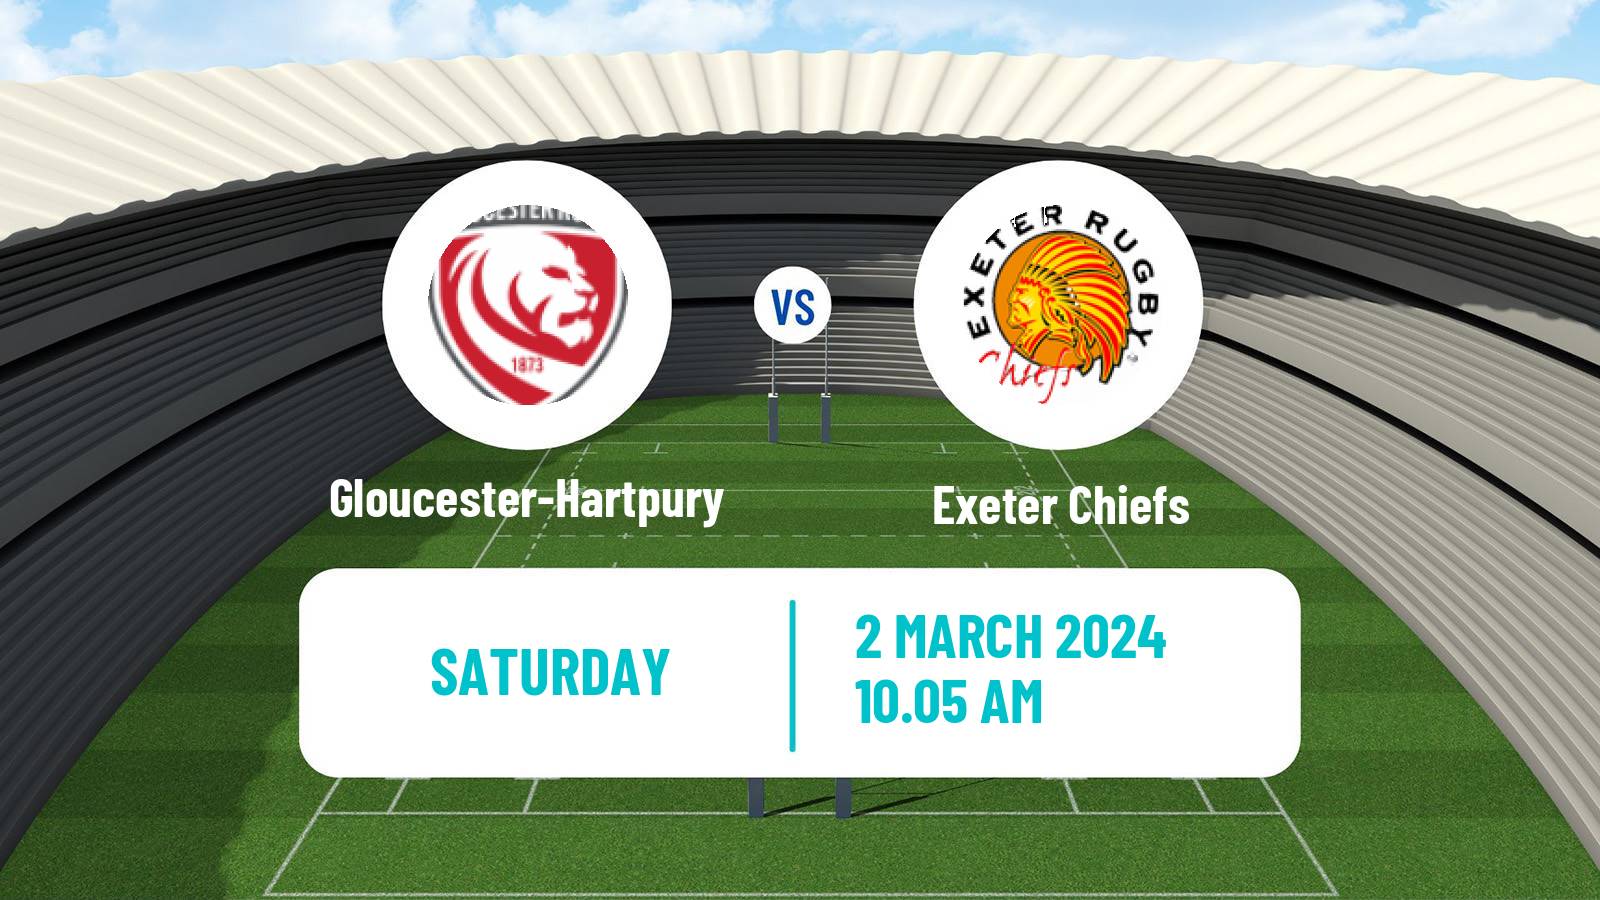 Rugby union English Premier 15s Rugby Women Gloucester-Hartpury - Exeter Chiefs